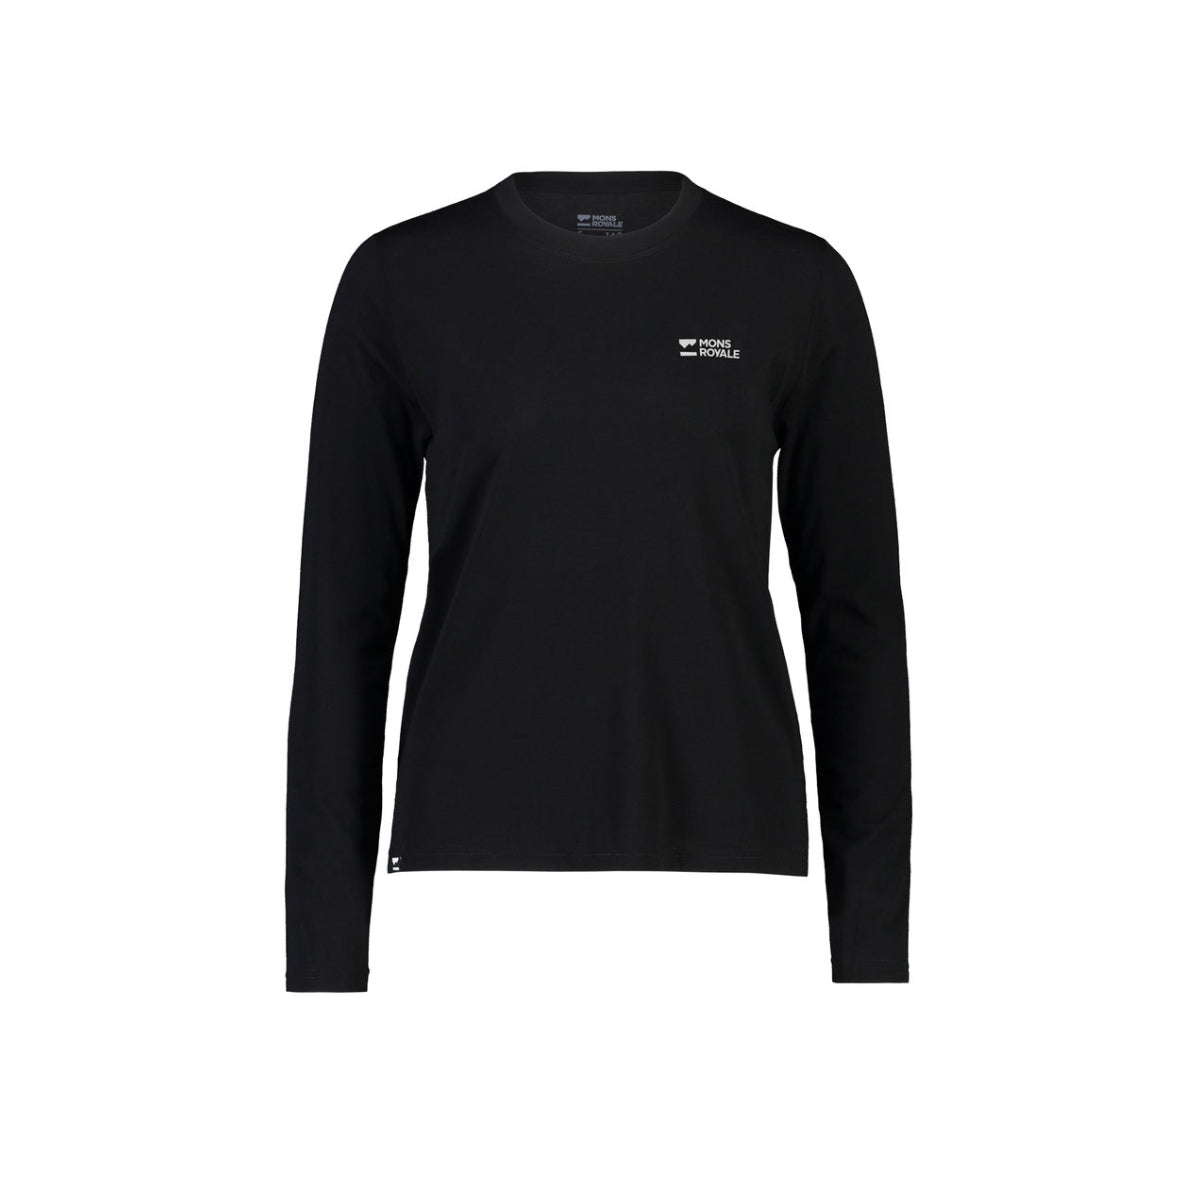 Mons Royale - Women's Icon Relaxed LS - Black